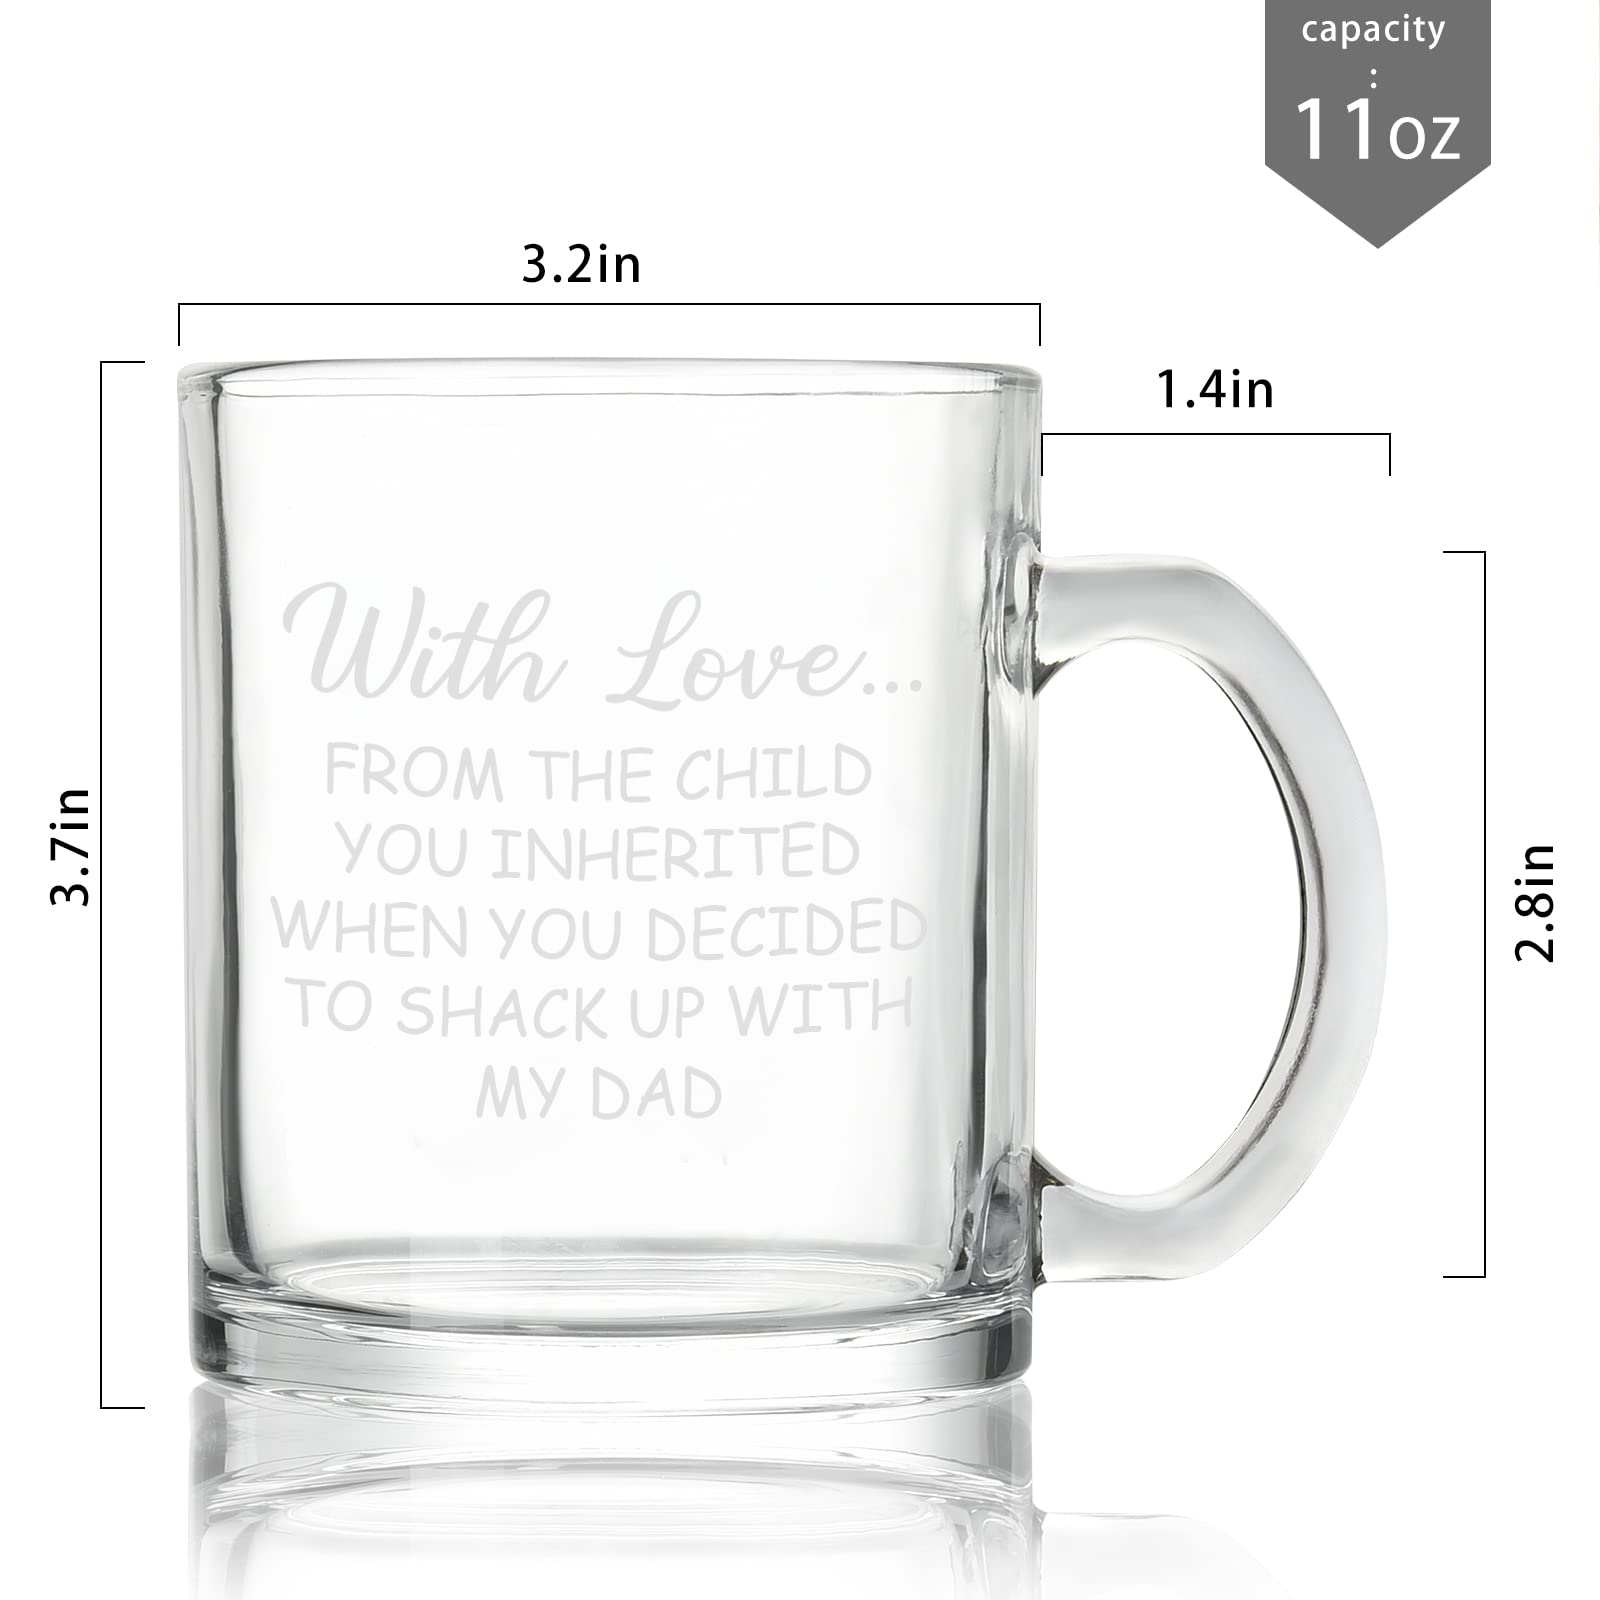 DAZLUTE Funny Glass Coffee Mug Gifts for Stepmom, With Love from the Child You Inherited Clear Coffee Cups with Handle, Mother’s Day Christmas Birthday Gifts for Stepmom Stepmother, 11 Oz